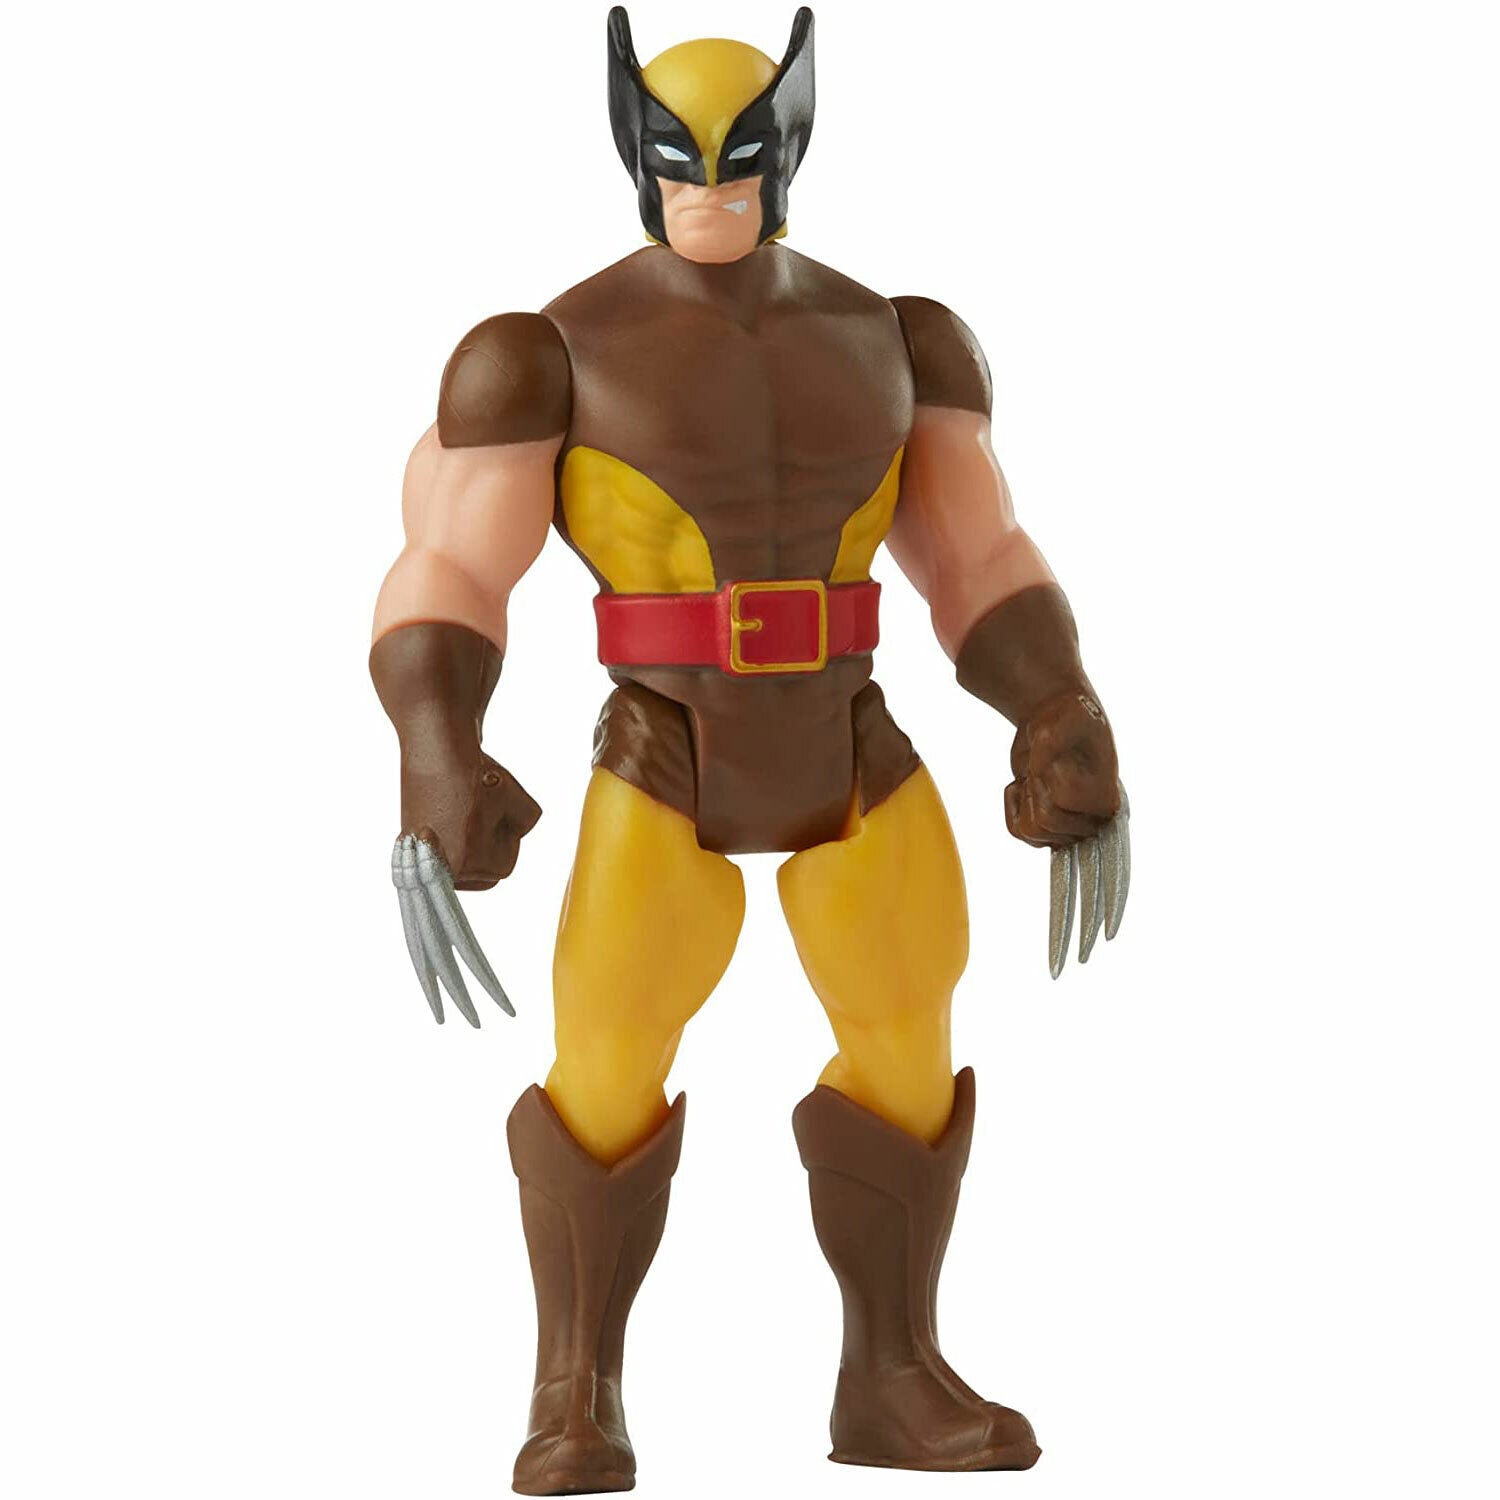 "New Marvel Legends Retro Wolverine 3.75" Action Figure - Collectible Toy"